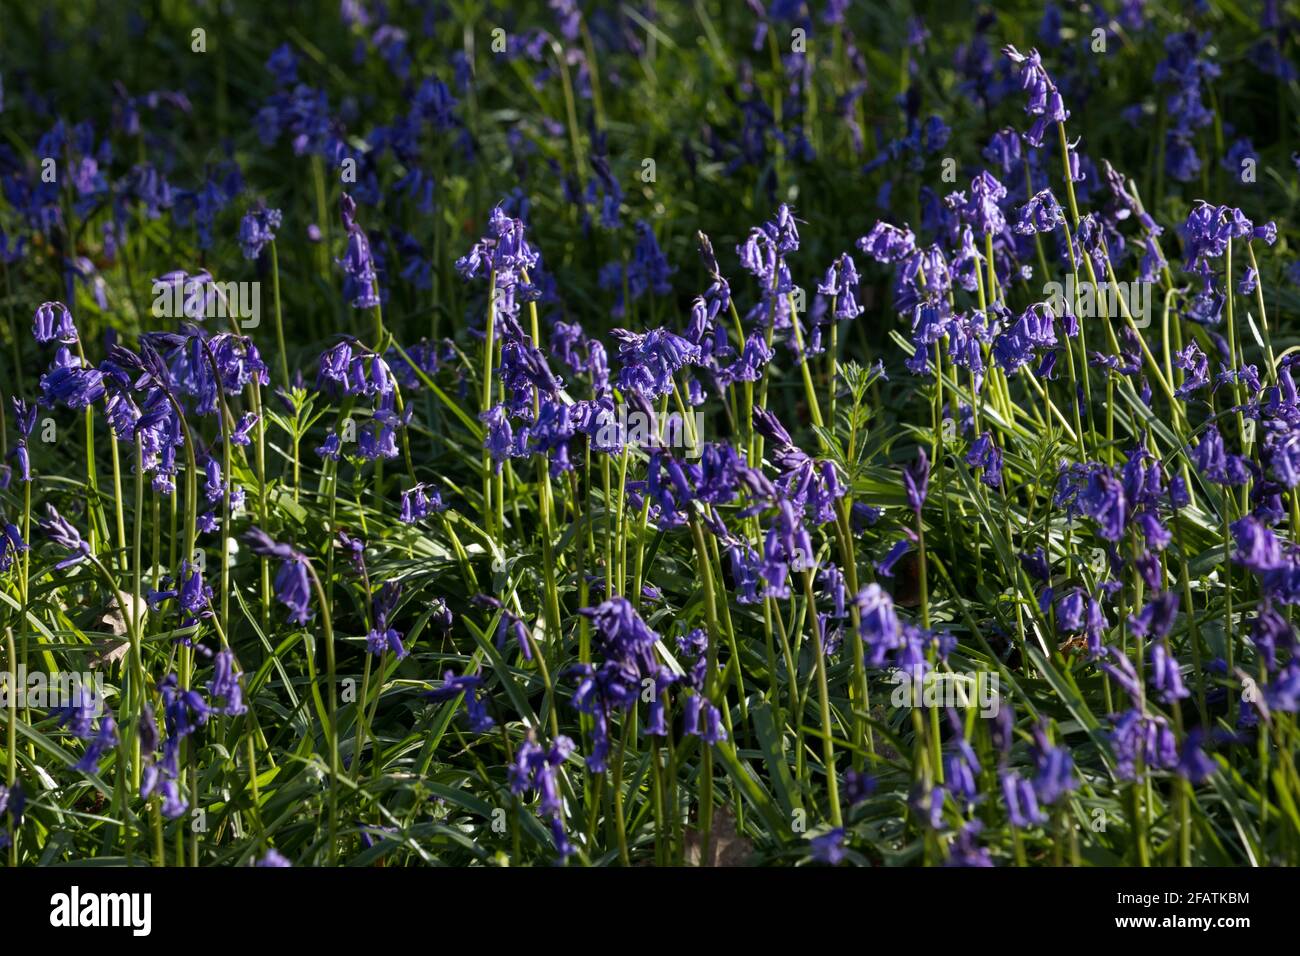 Sulham, UK. 23rd April, 2021. Bluebells bloom in early morning sunlight in Sulham Woods. The UK is home to over half of the world'ss population of bluebells, split between the native English or British bluebell (Hyacinthoides non-scripta), as seen in Sulham Woods, which is protected under the Wildlife and Countryside Act 1981, and the fast spreading Spanish bluebell (Hyacinthoides hispanica). Credit: Mark Kerrison/Alamy Live News Stock Photo